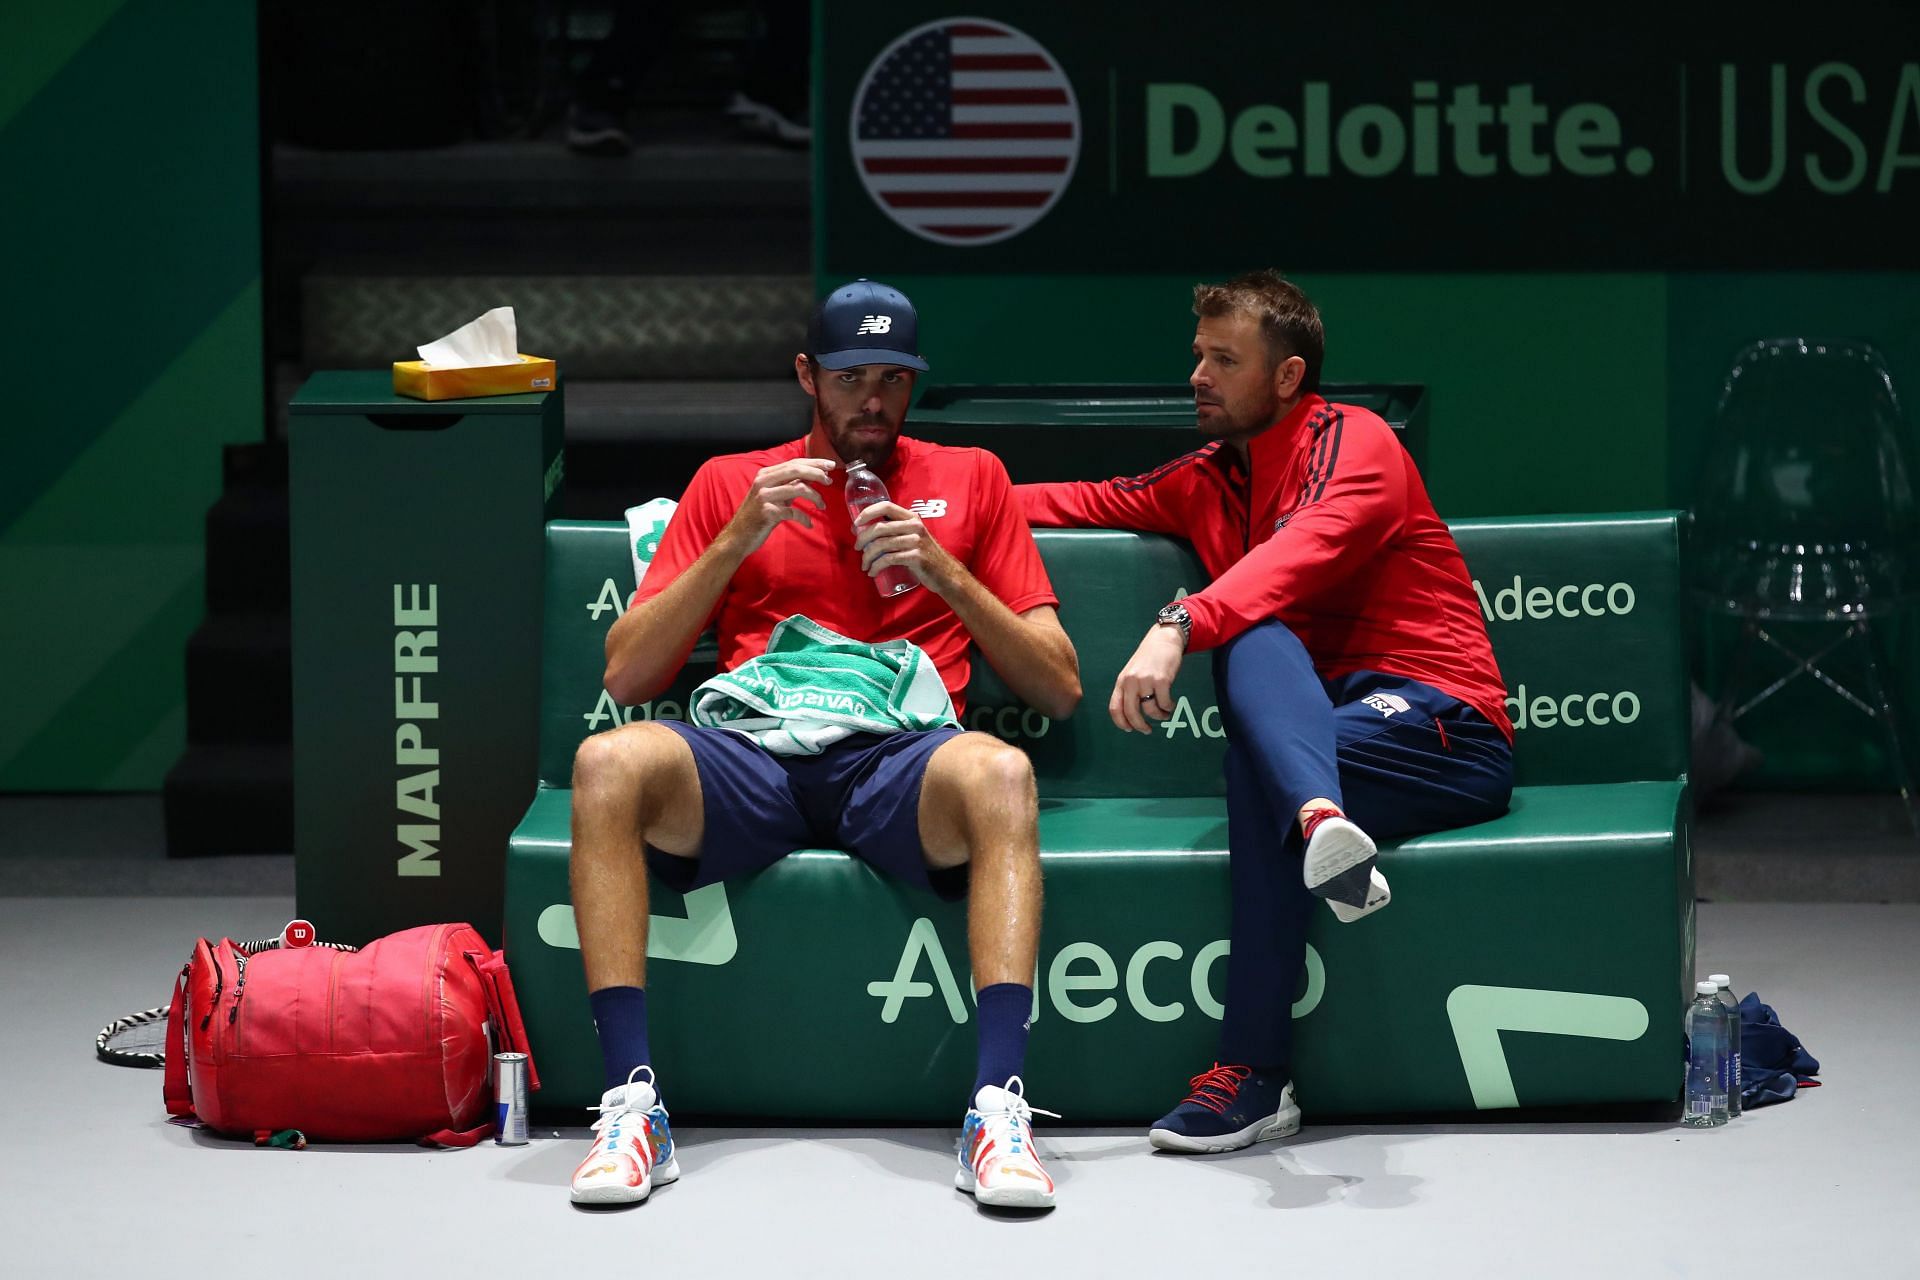 Mardy Fish with Reilly Opelka at the 2019 Davis Cup